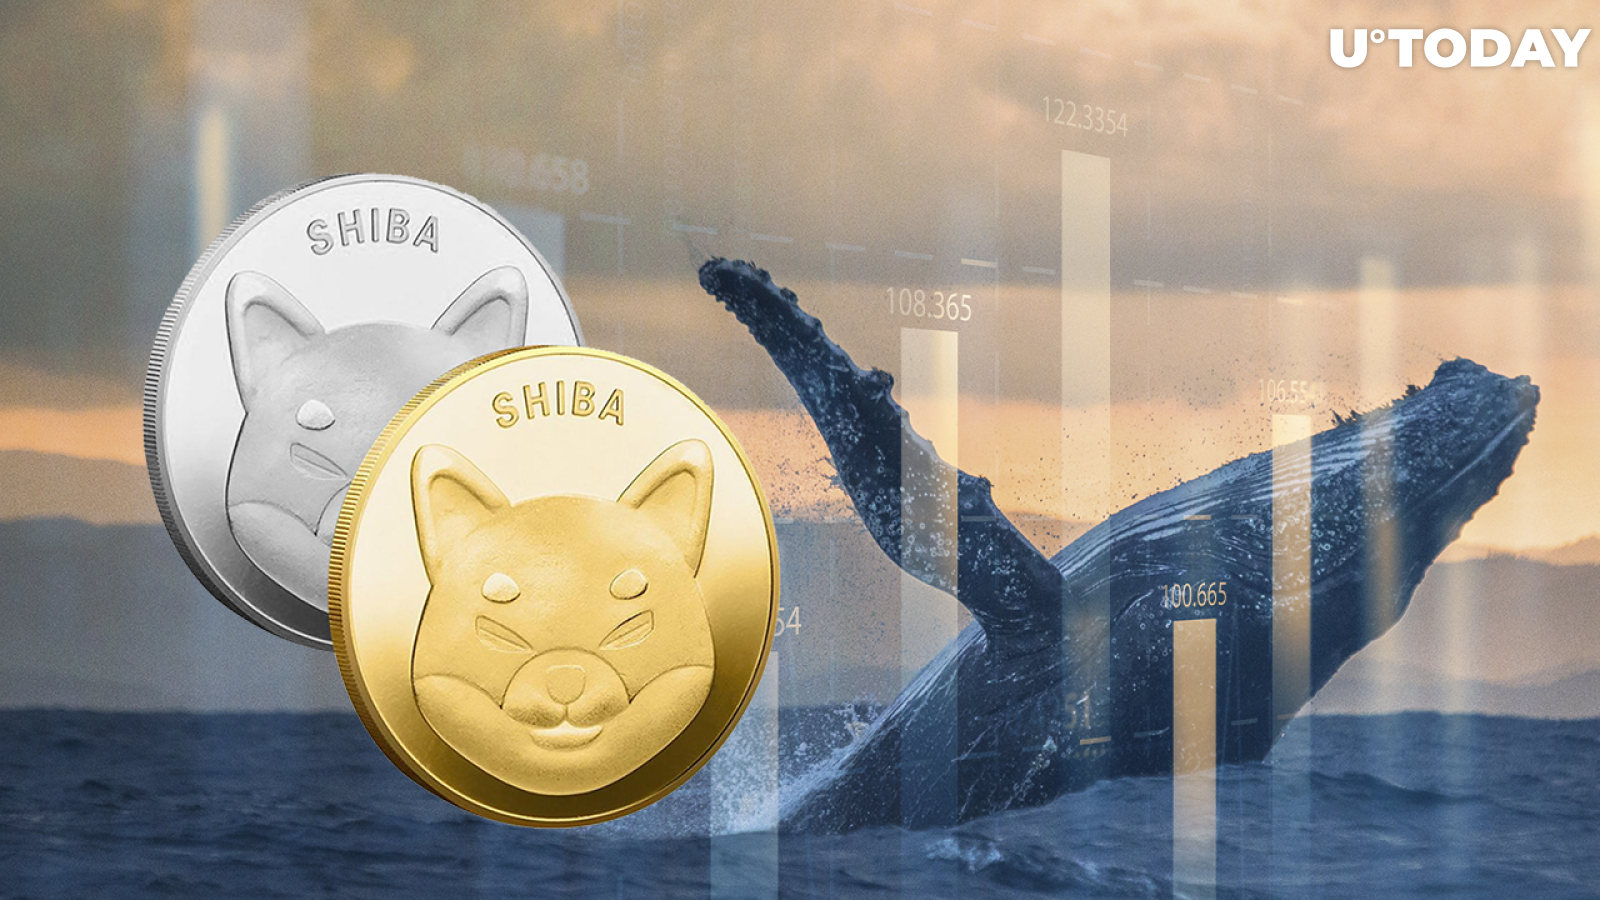 Shiba Inu Remains Largest Token Held by Whales as SHIB Price Rises 15%